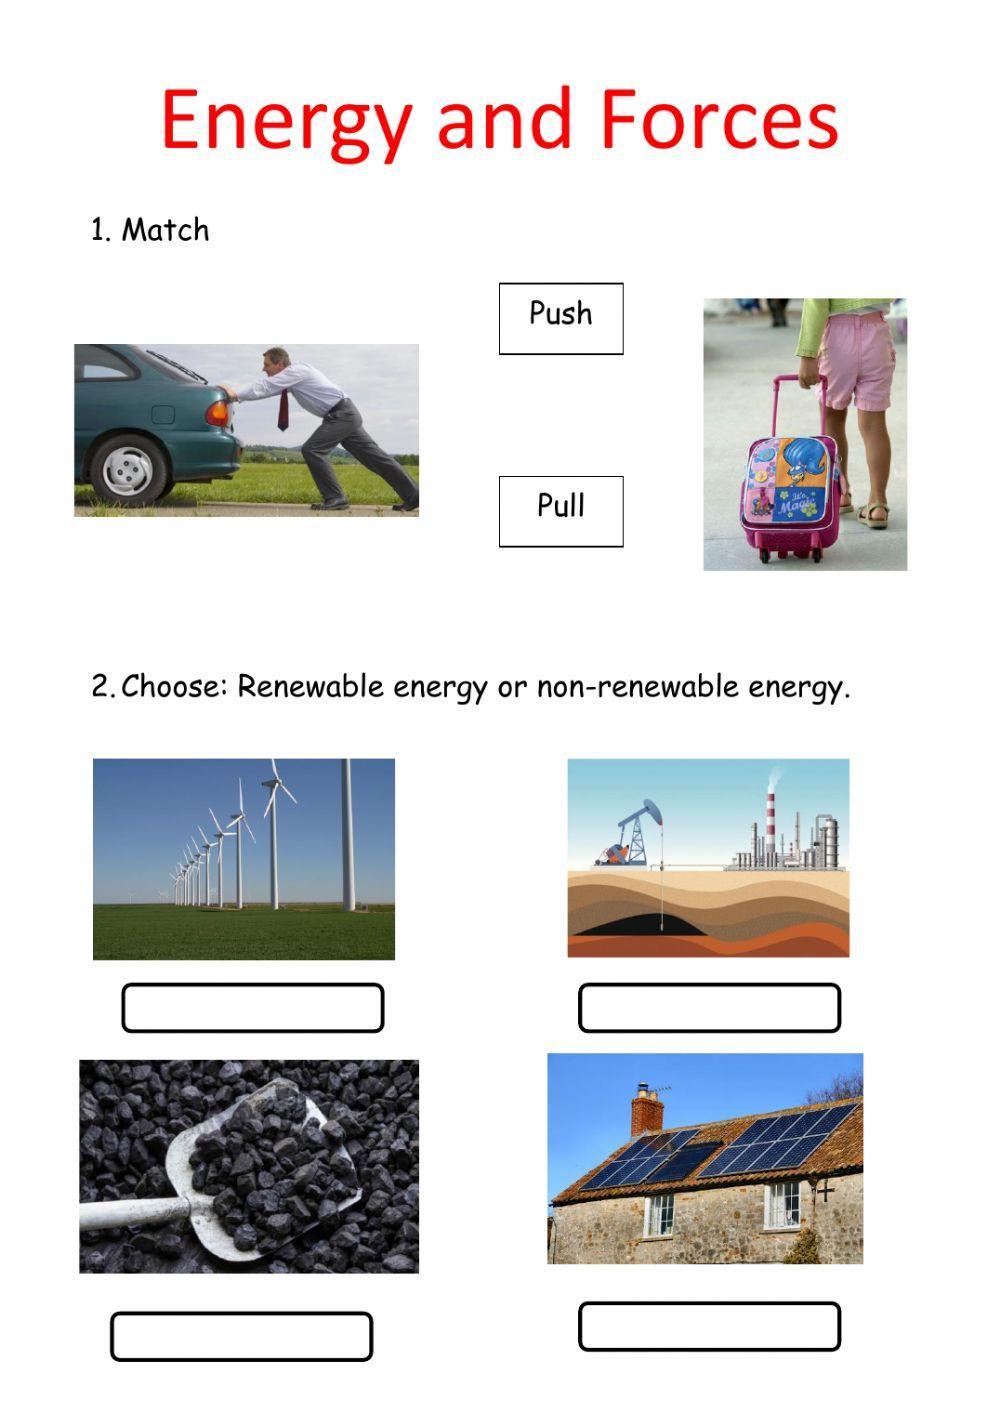 Energy and forces